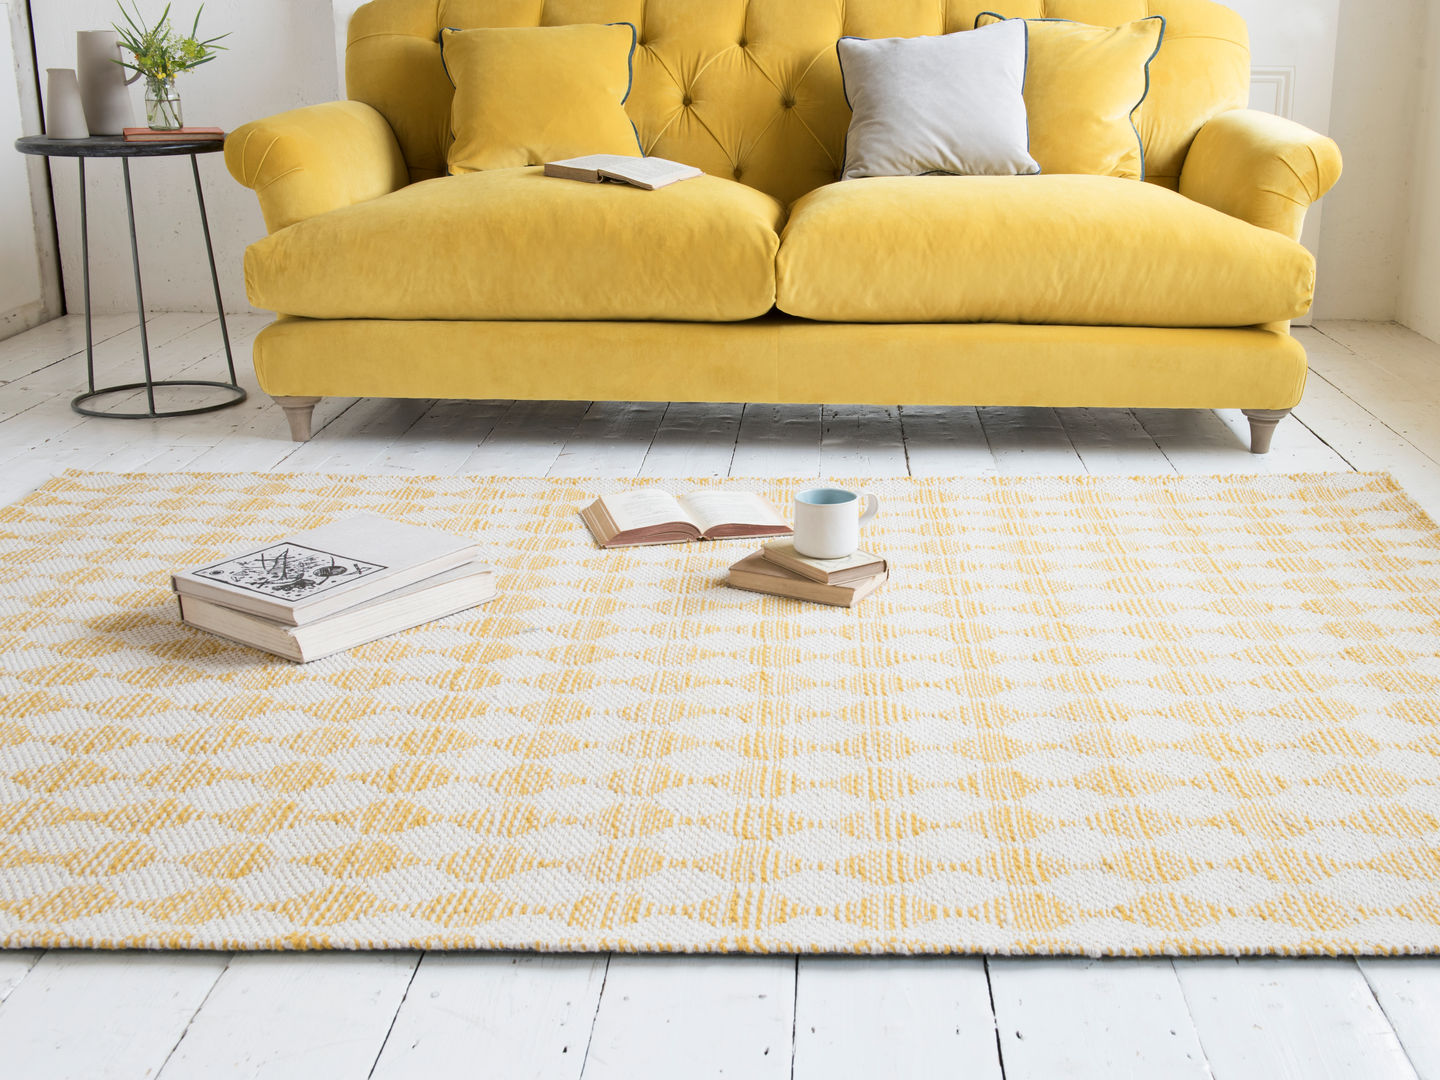 Waves rug in Yellow Loaf พื้น พรม